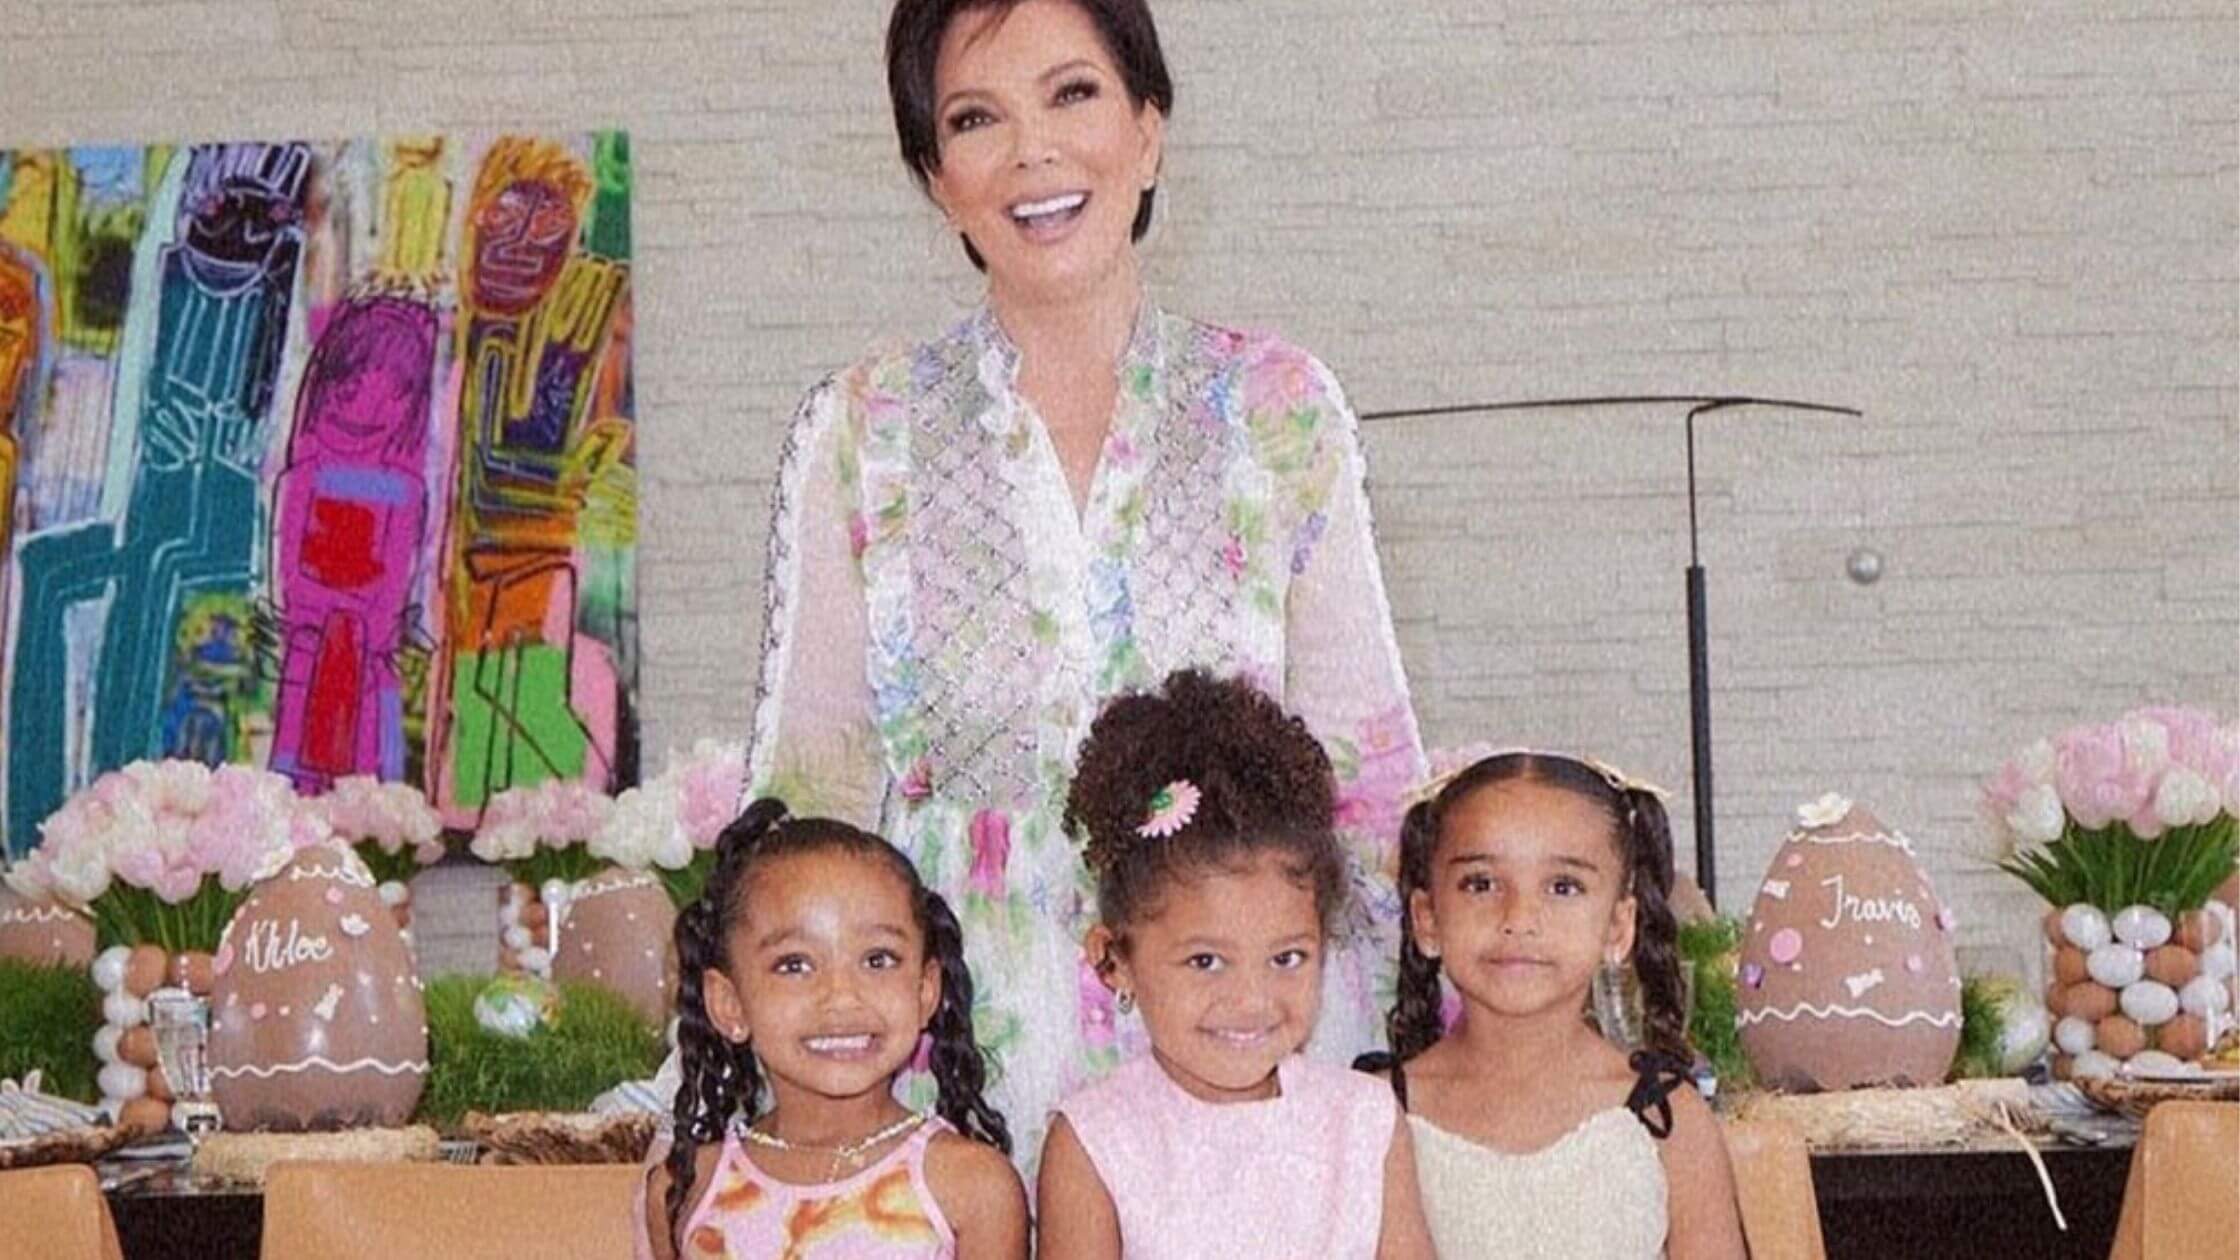 Kris Jenner Responds To Question About The Kardashians Having Kids Outside Of Marriage